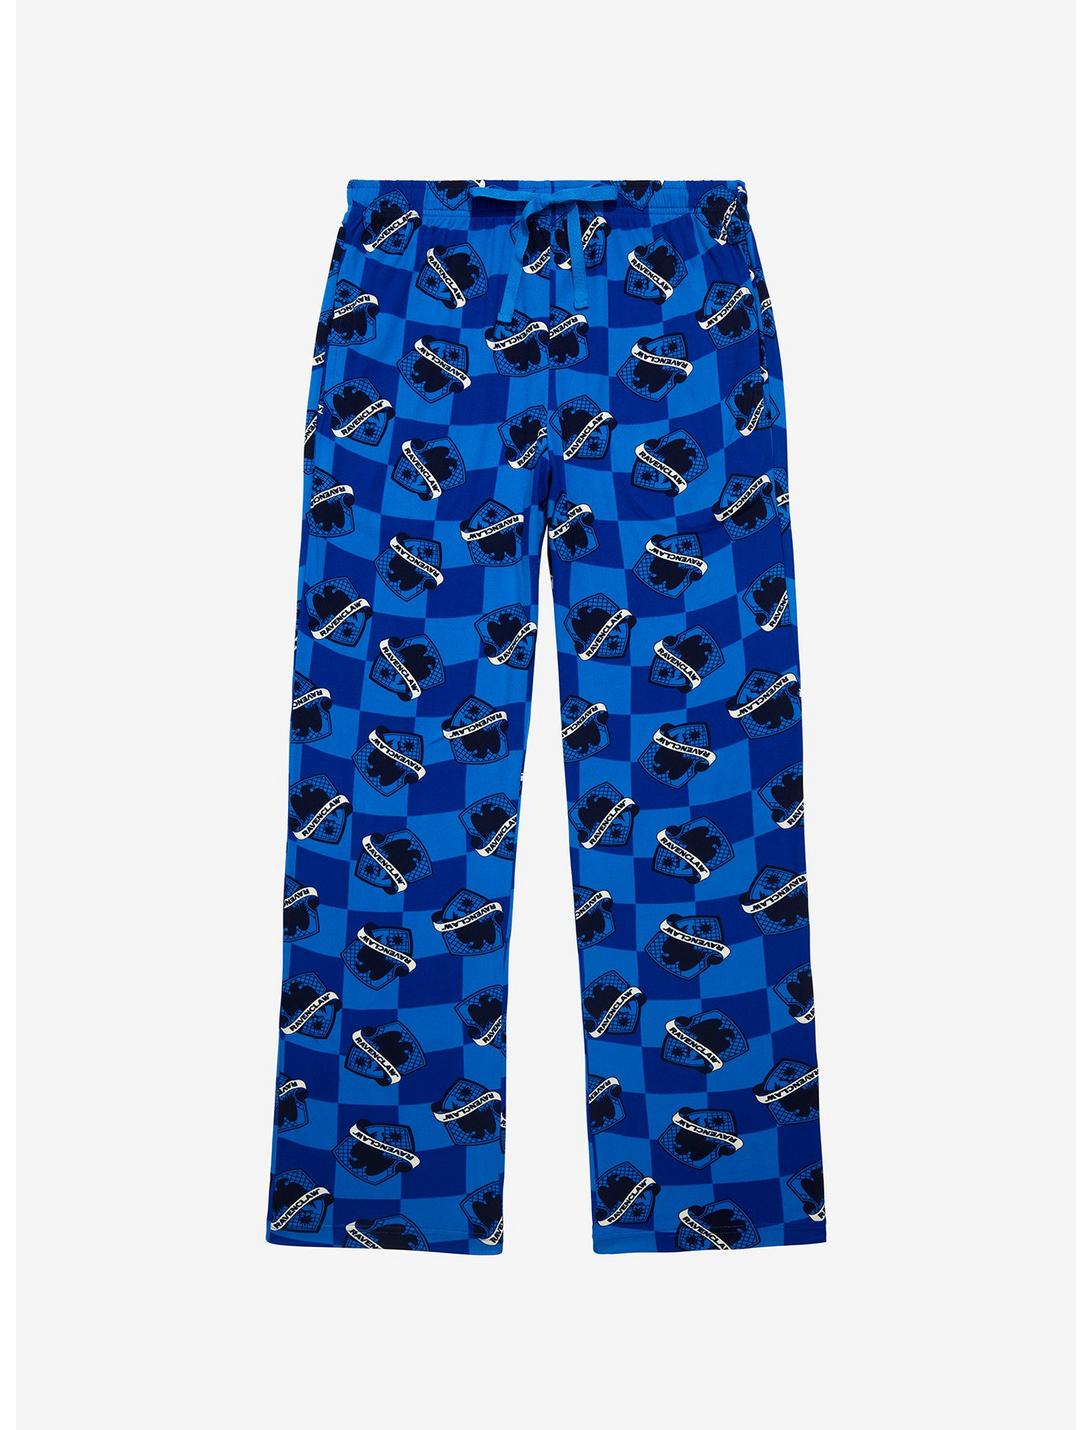 Harry Potter Ravenclaw House Crest Checkered Sleep Pants - BoxLunch Exclusive , MULTI, hi-res